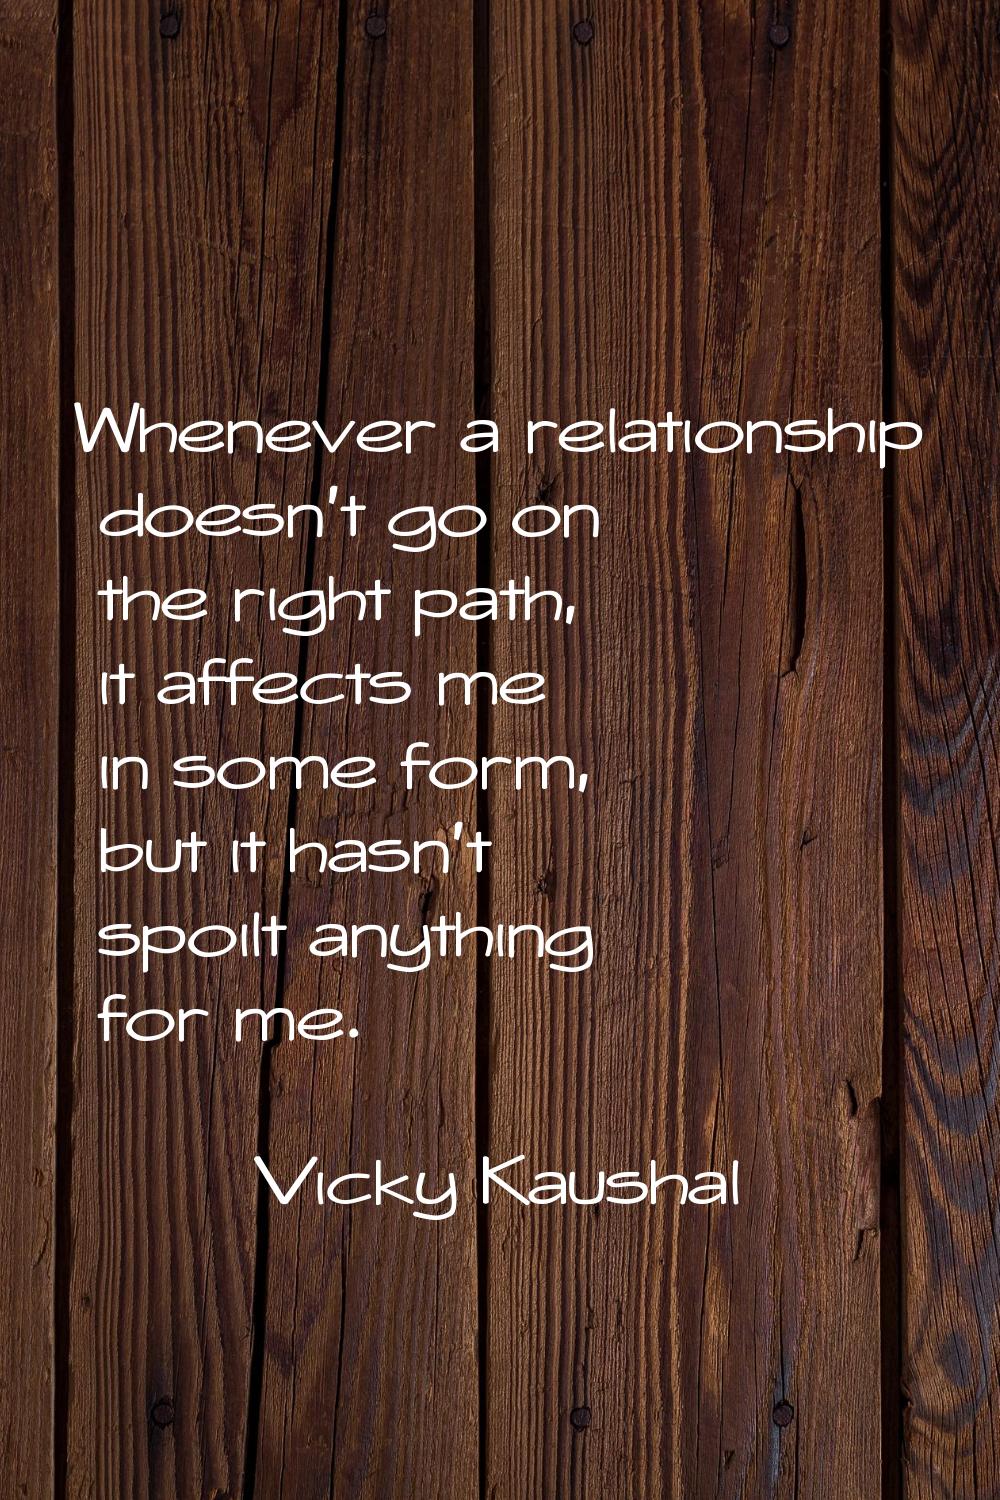 Whenever a relationship doesn't go on the right path, it affects me in some form, but it hasn't spo